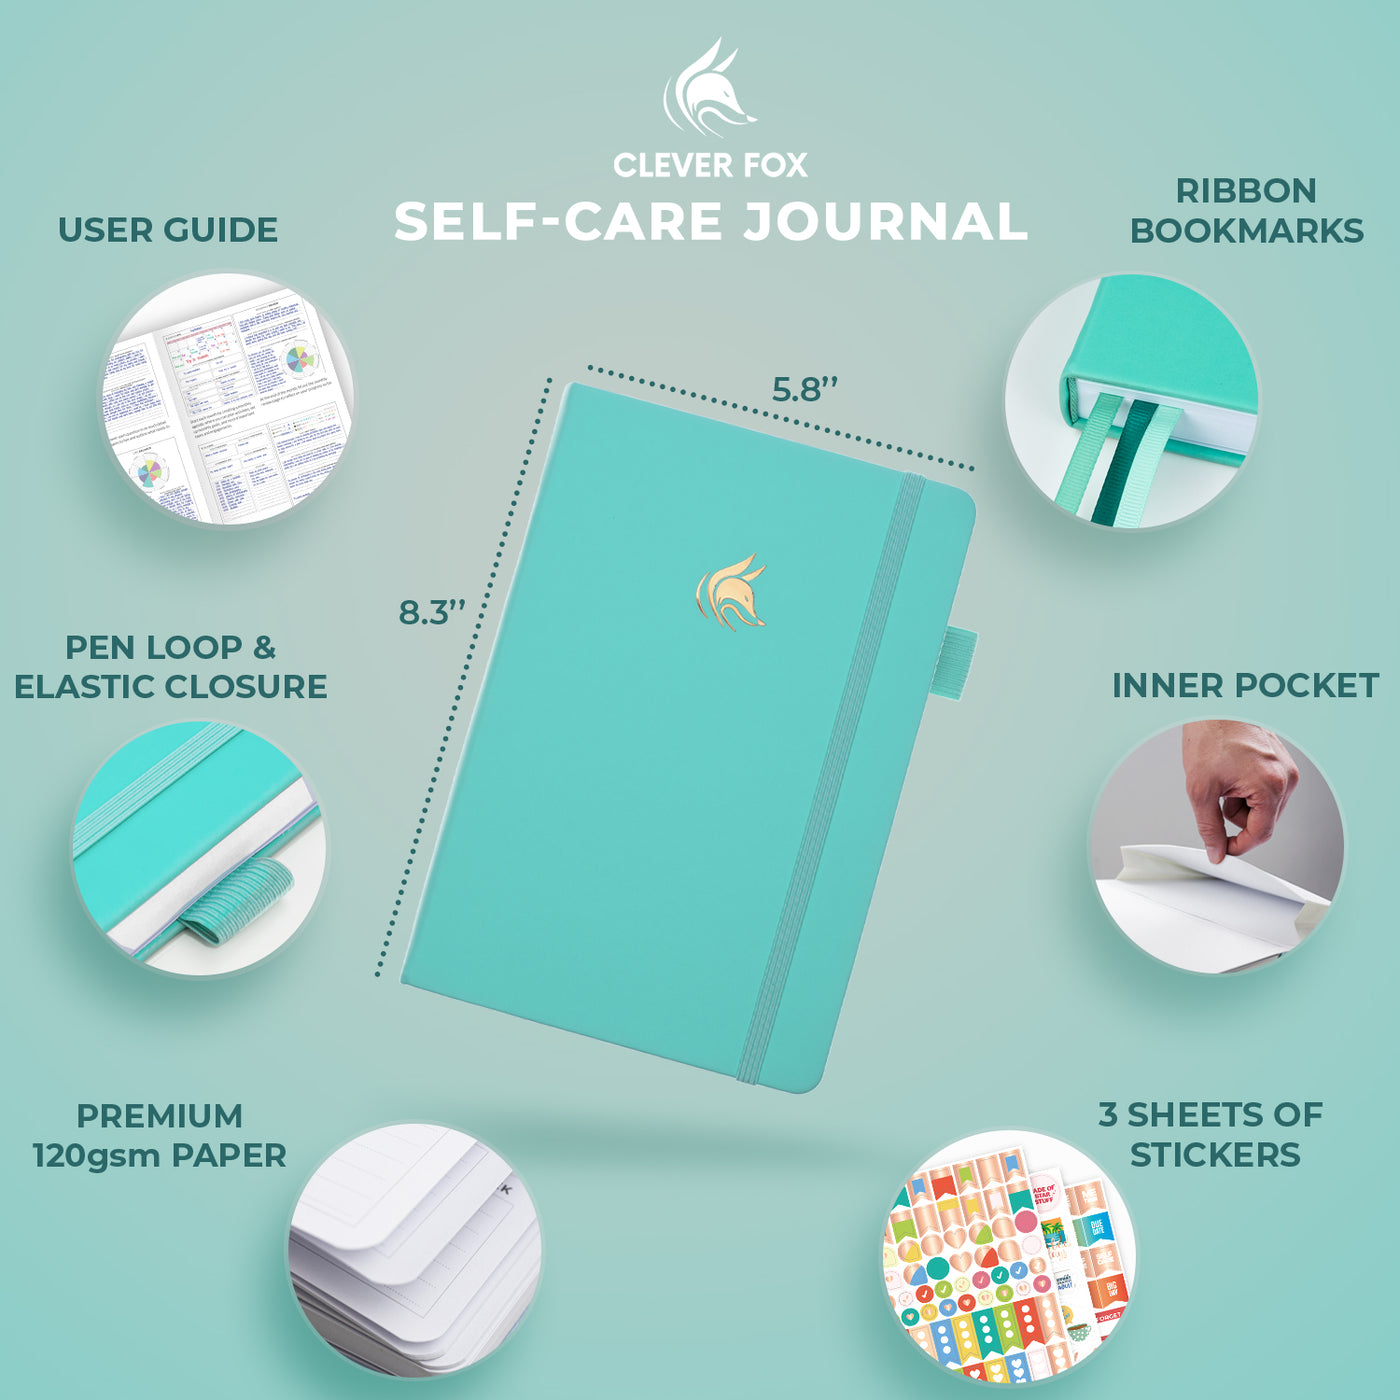 12 Best Guided Journals & Self-Care Planners